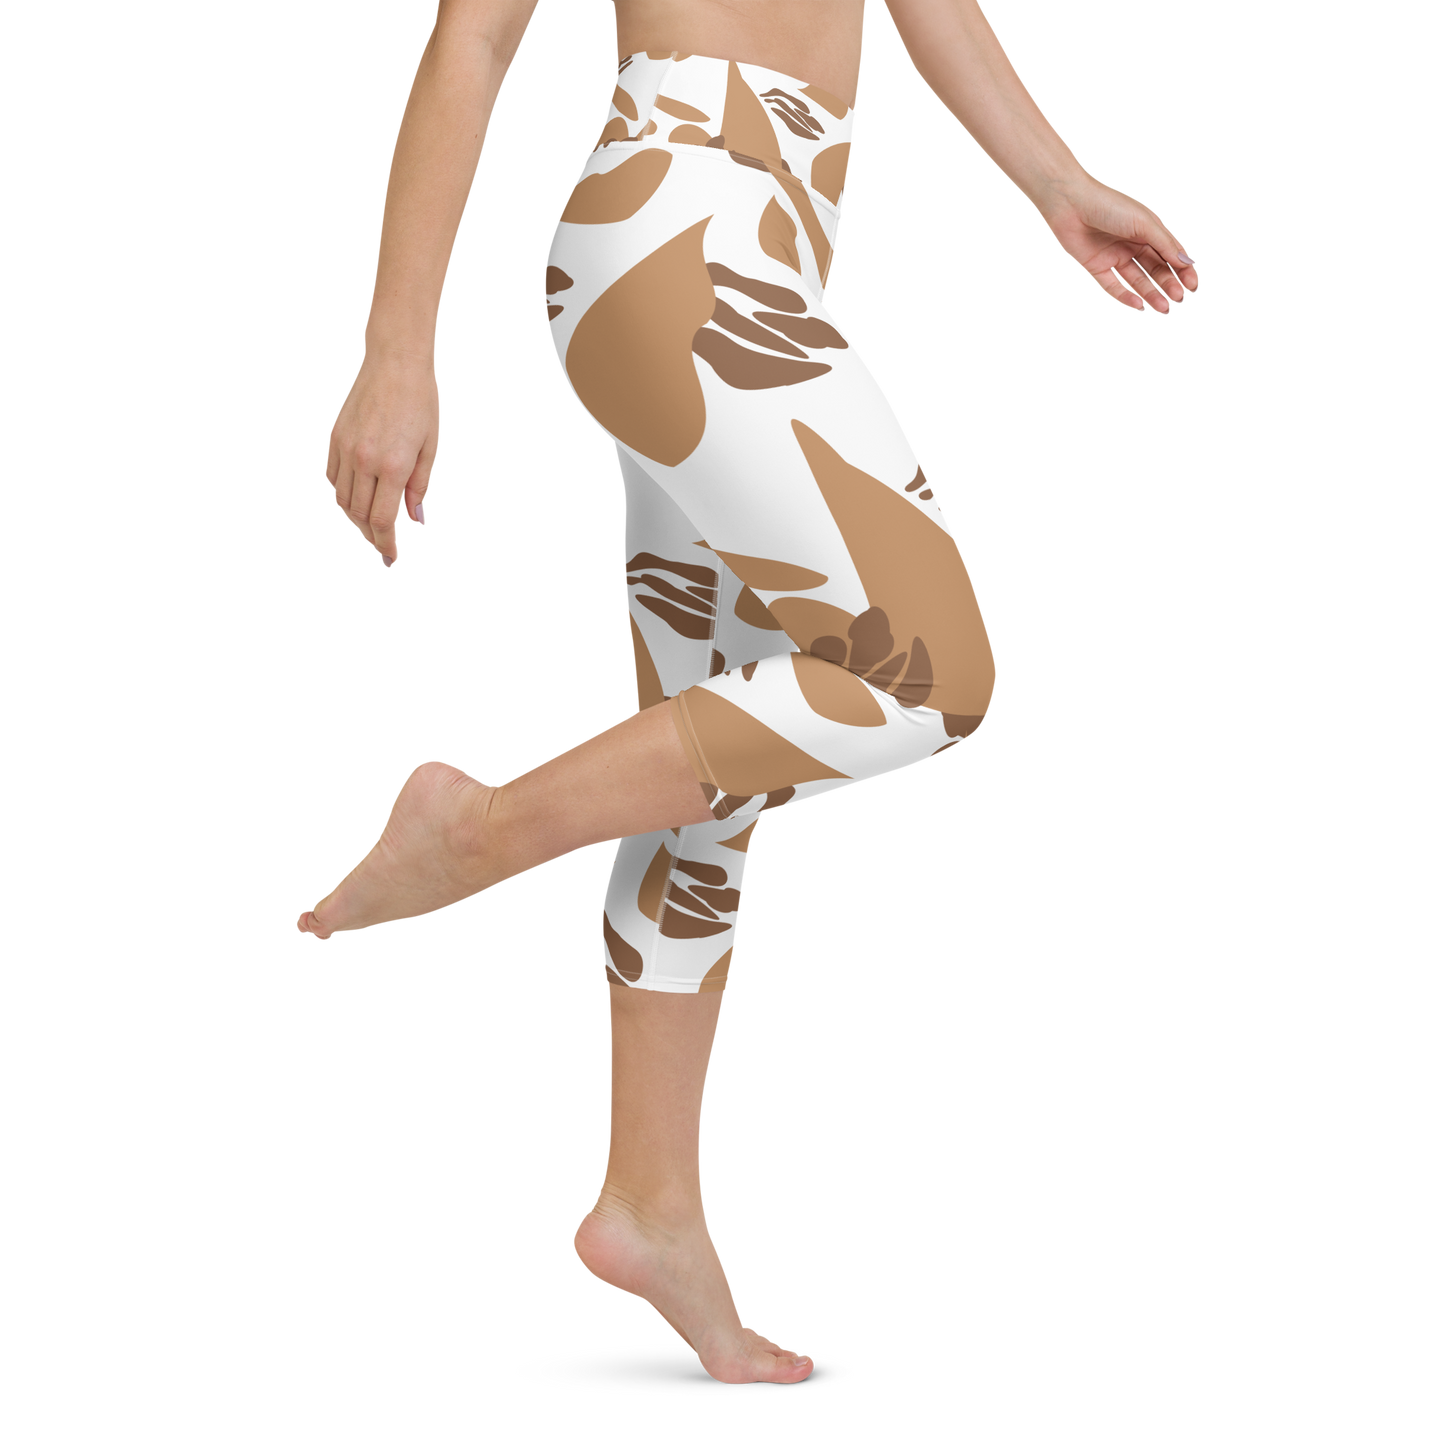 Brown & White Shapes | Abstract Patterns | All-Over Print Yoga Capri Leggings - #9